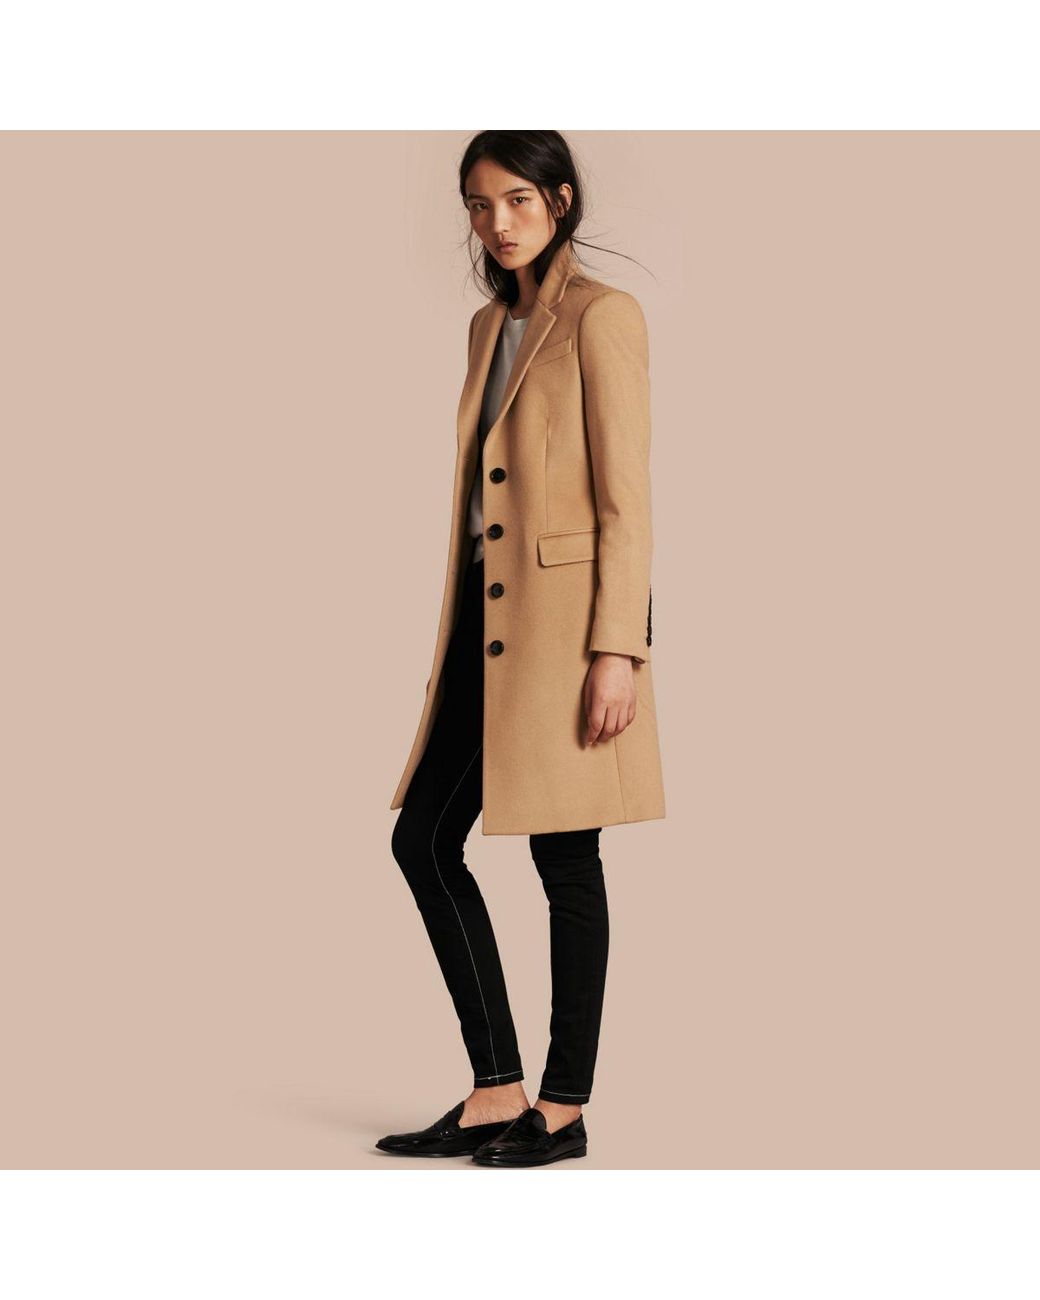 Burberry Tailored Wool Cashmere Coat in Natural | Lyst